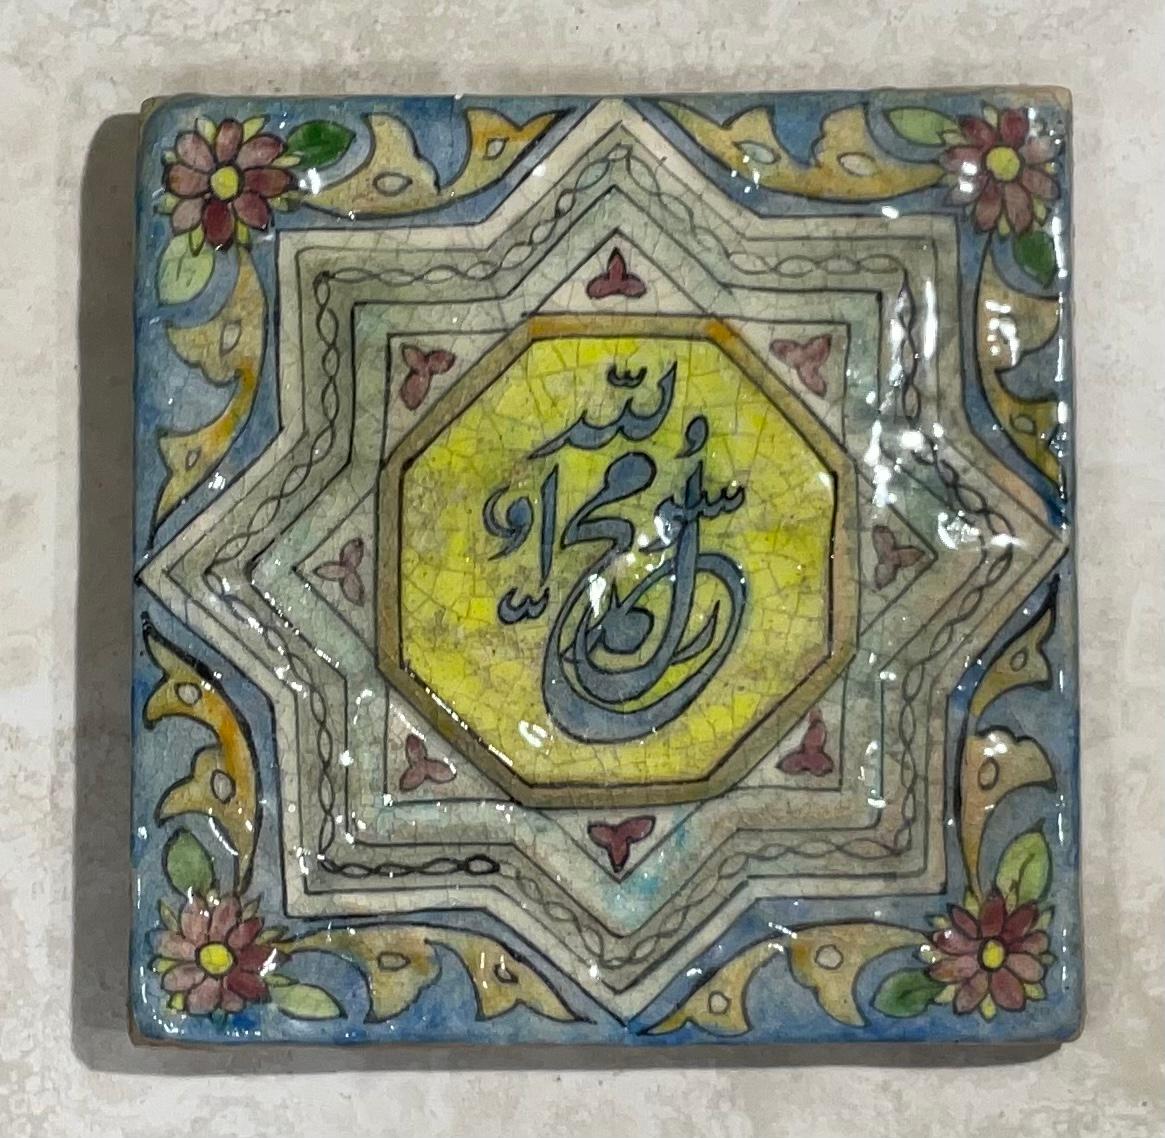 Mid-20th Century Wall Hanging Vintage Square Embossed Persian Tile with Islamic Script  For Sale